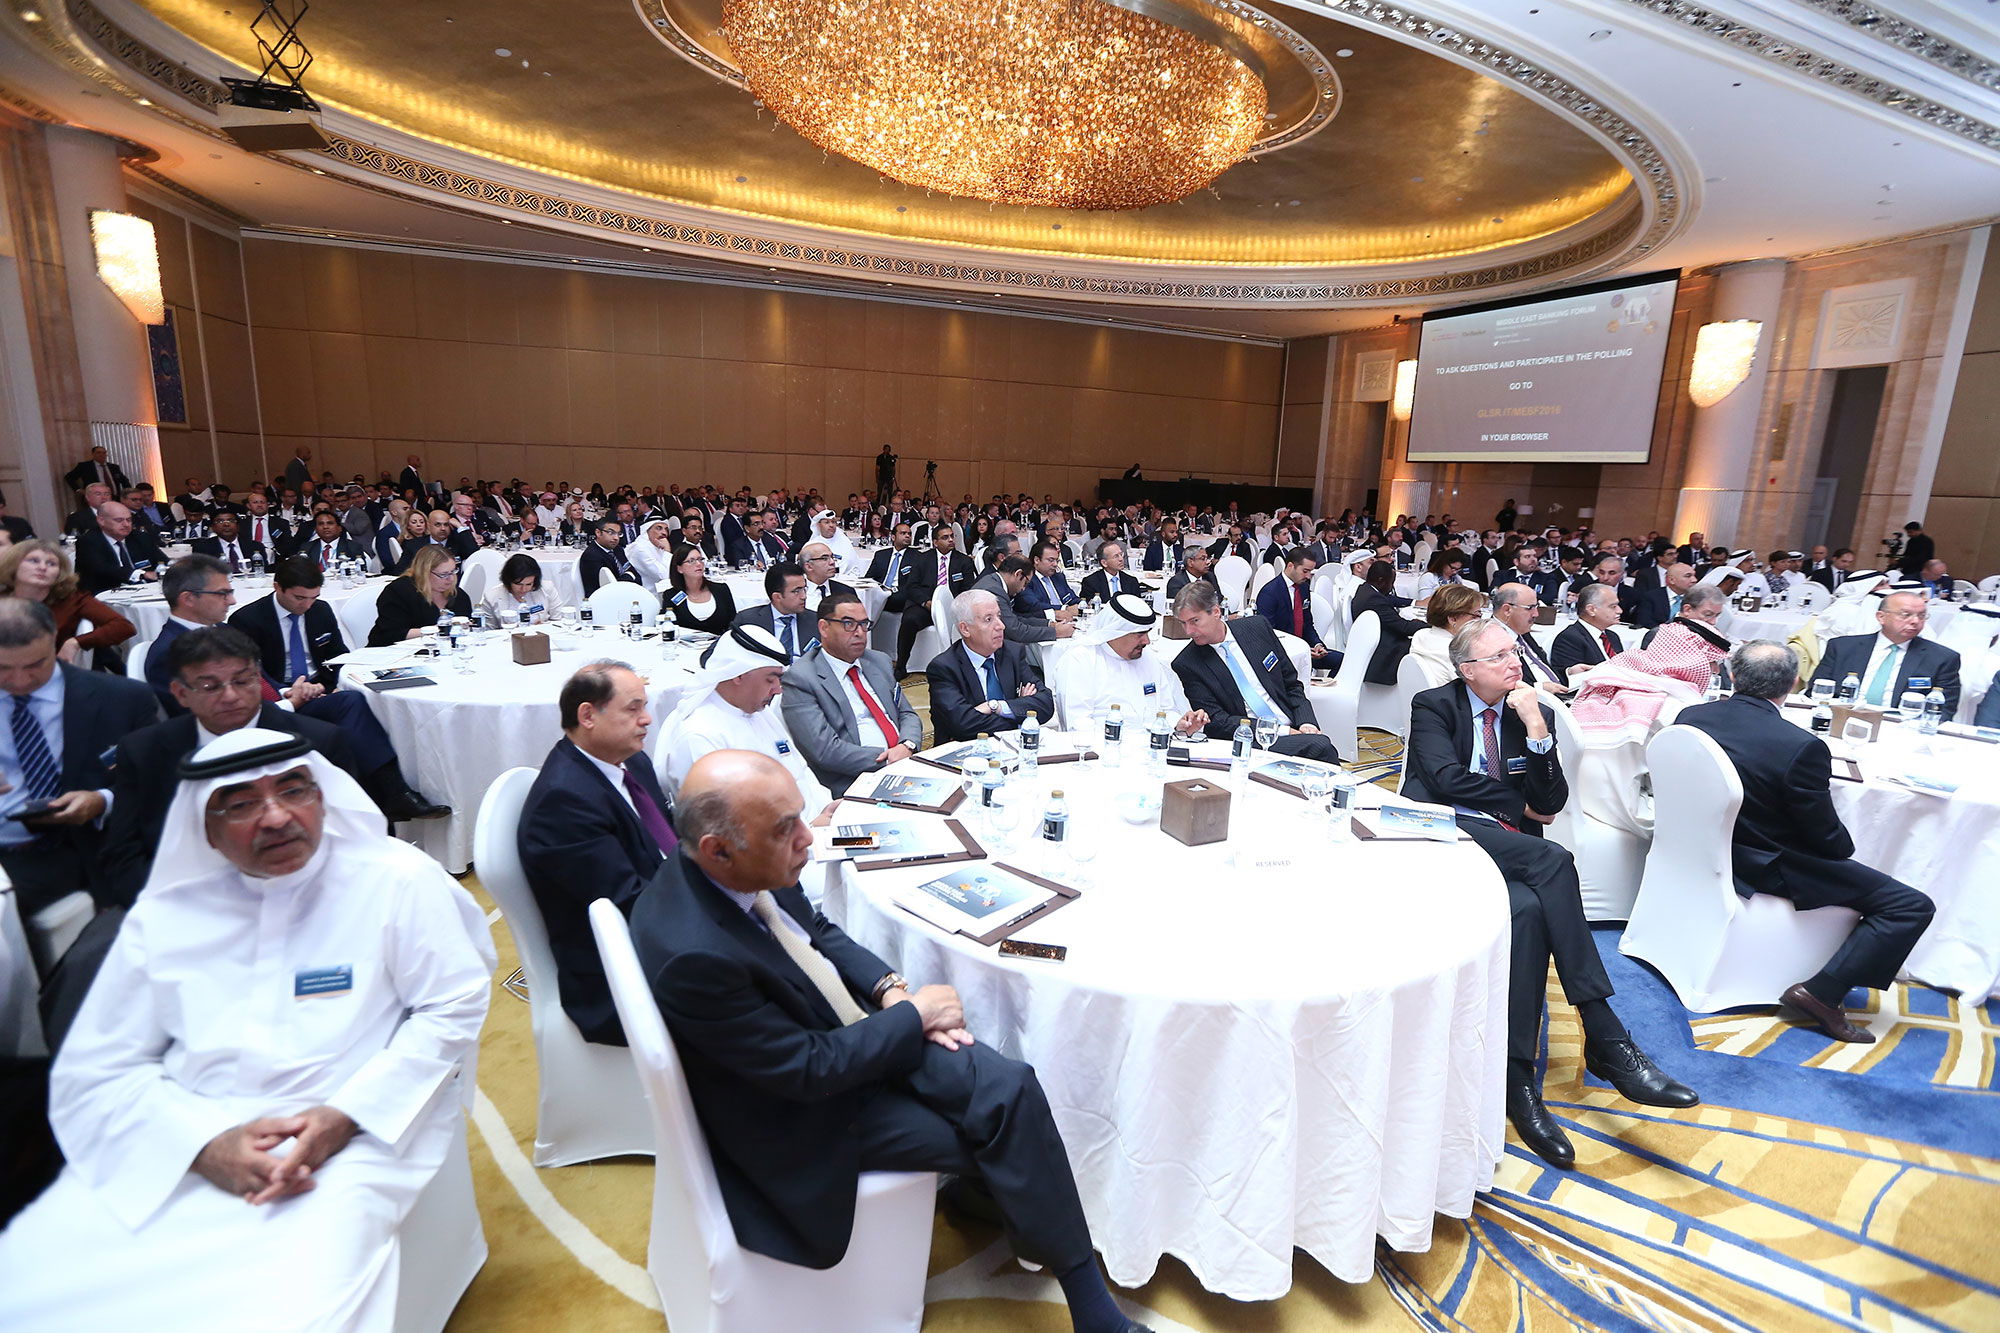 business lunch event in Dubai